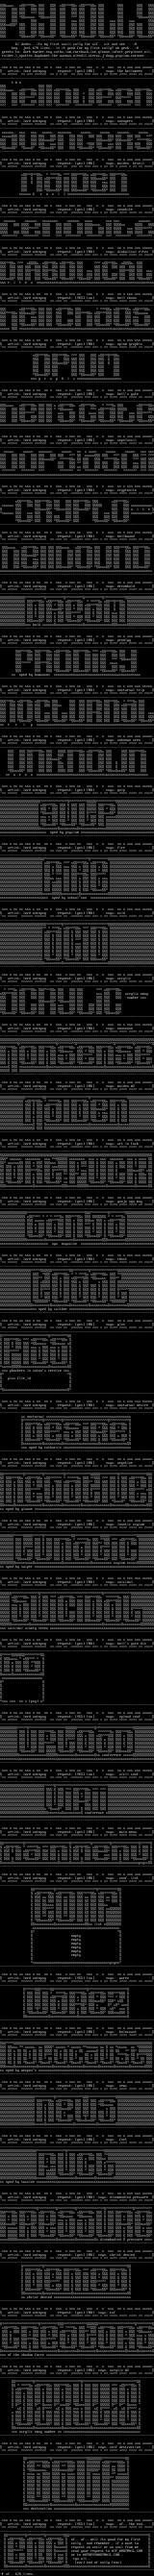 ascii colly (670 lines) by [lord.autopsy]